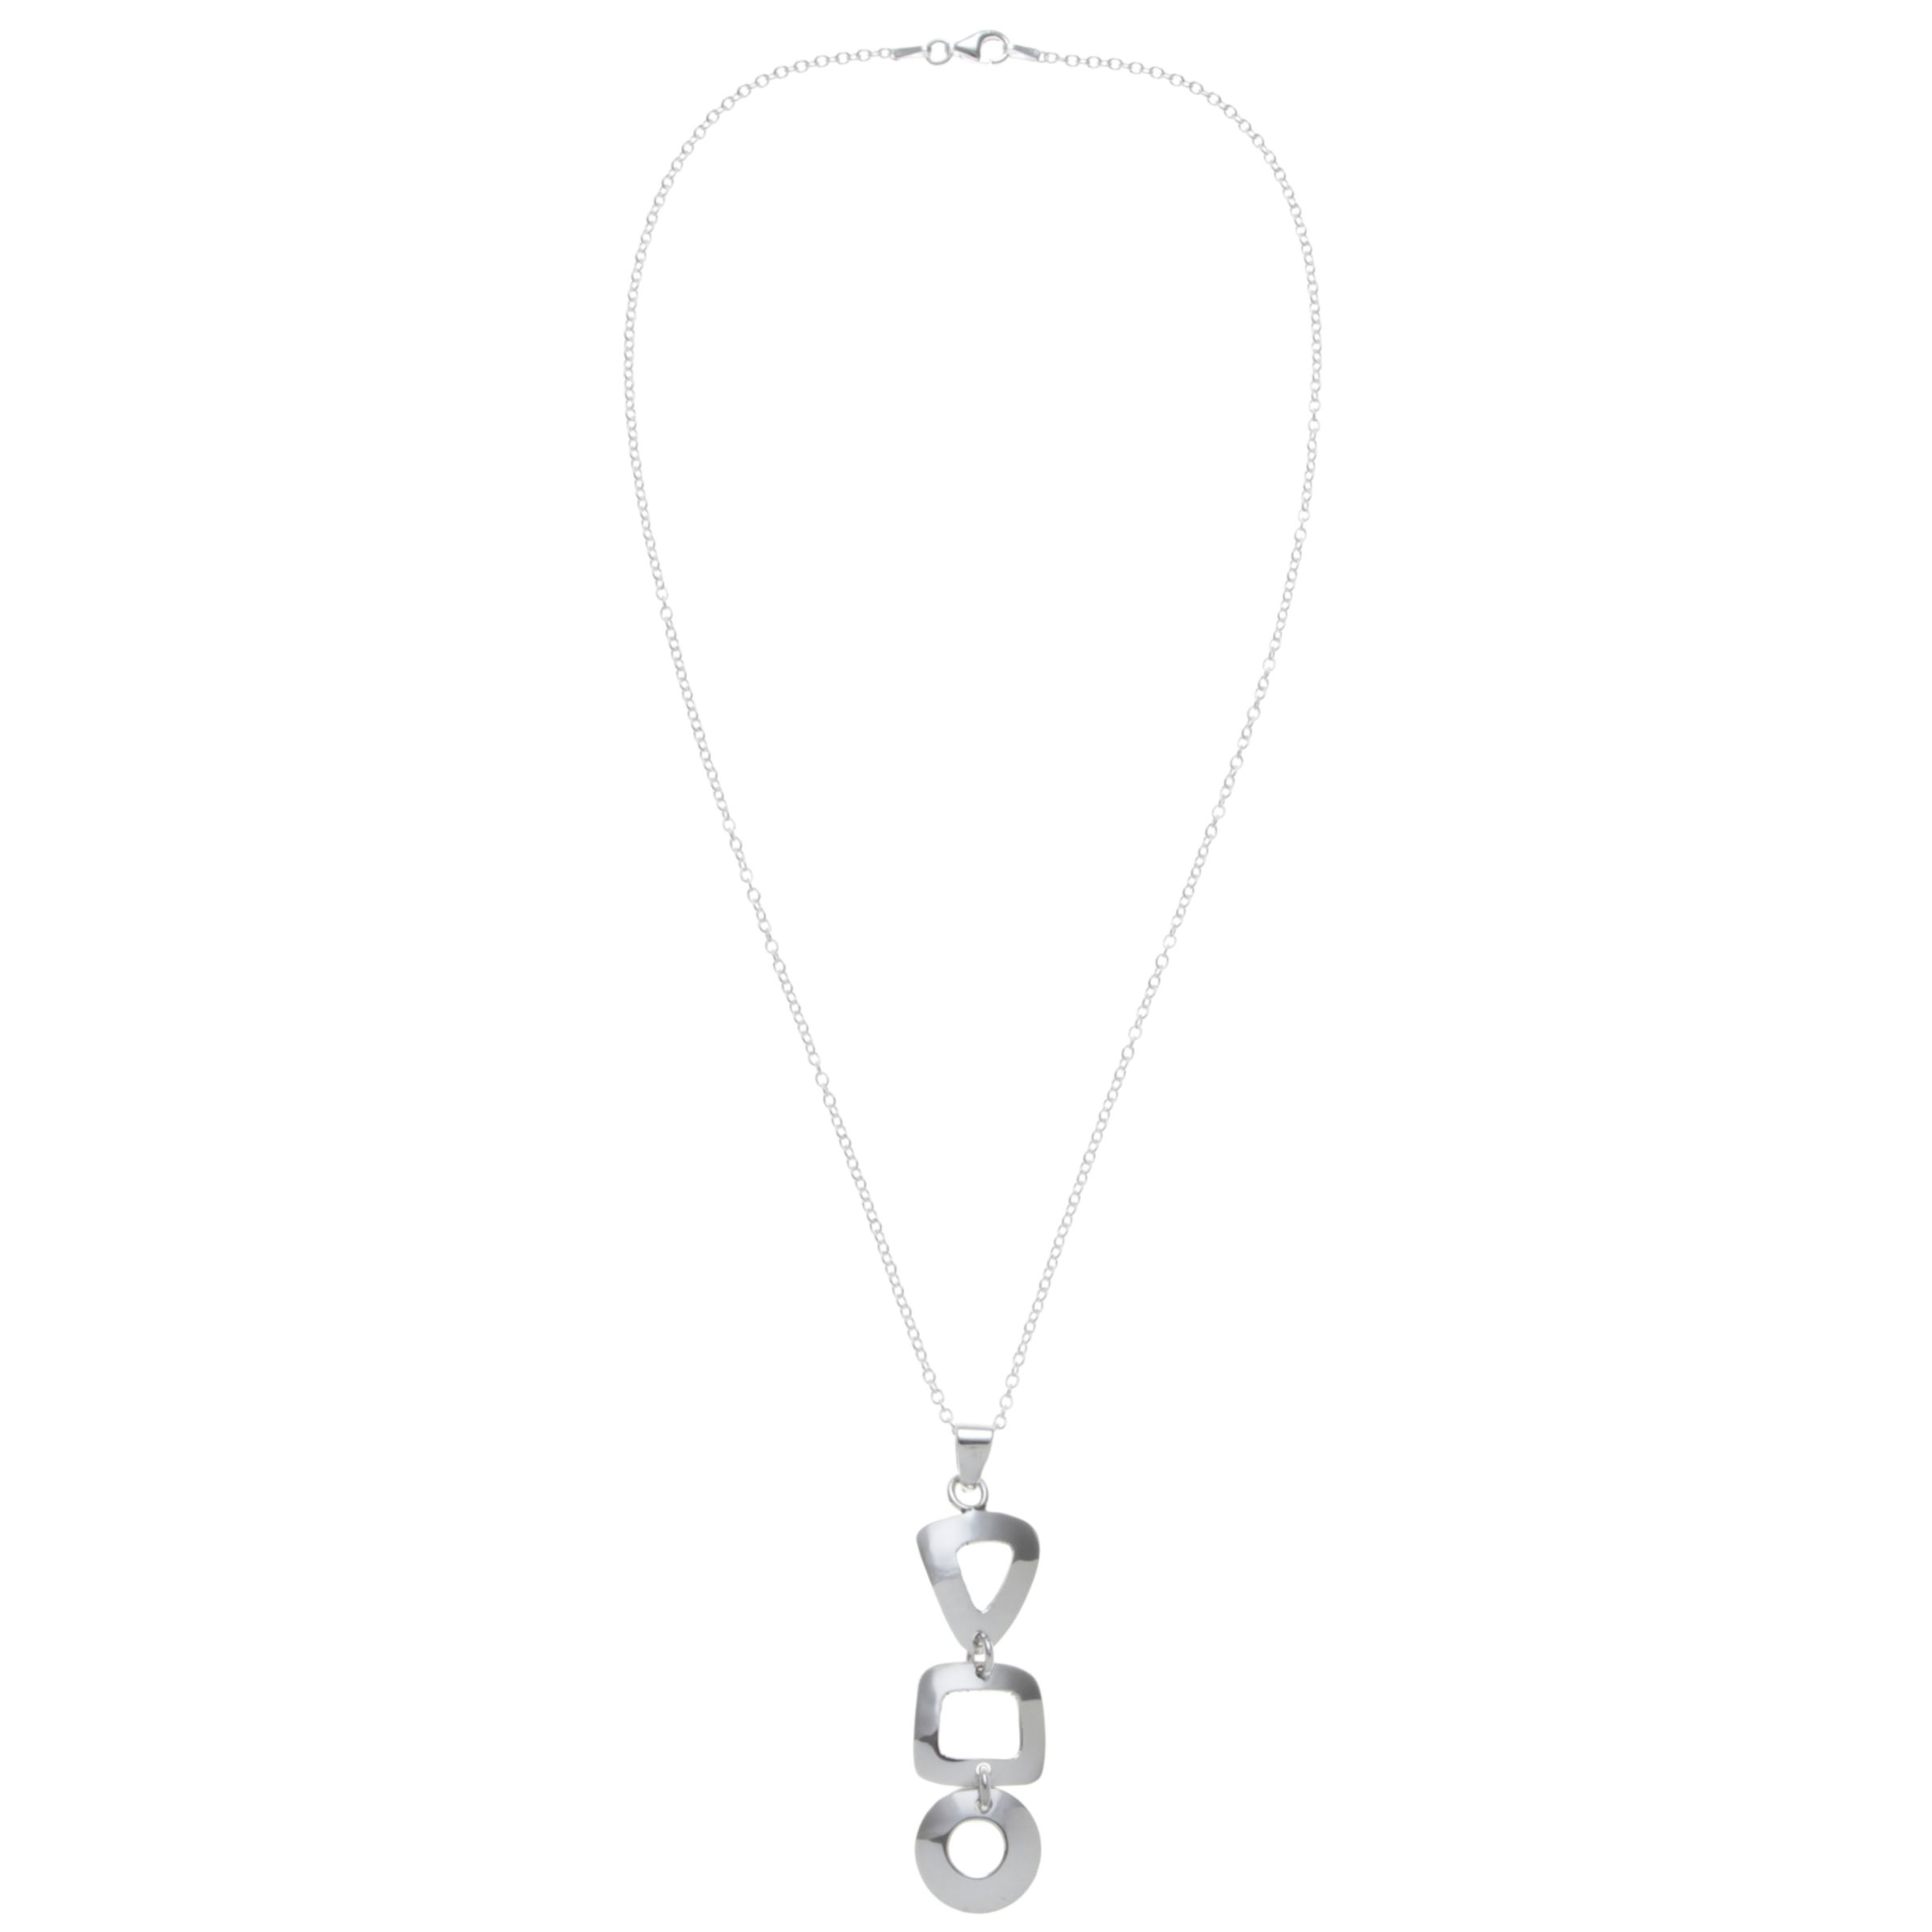 Buy Andea Sterling Silver Assorted Cut Out Pendant Necklace Online at johnlewis.com